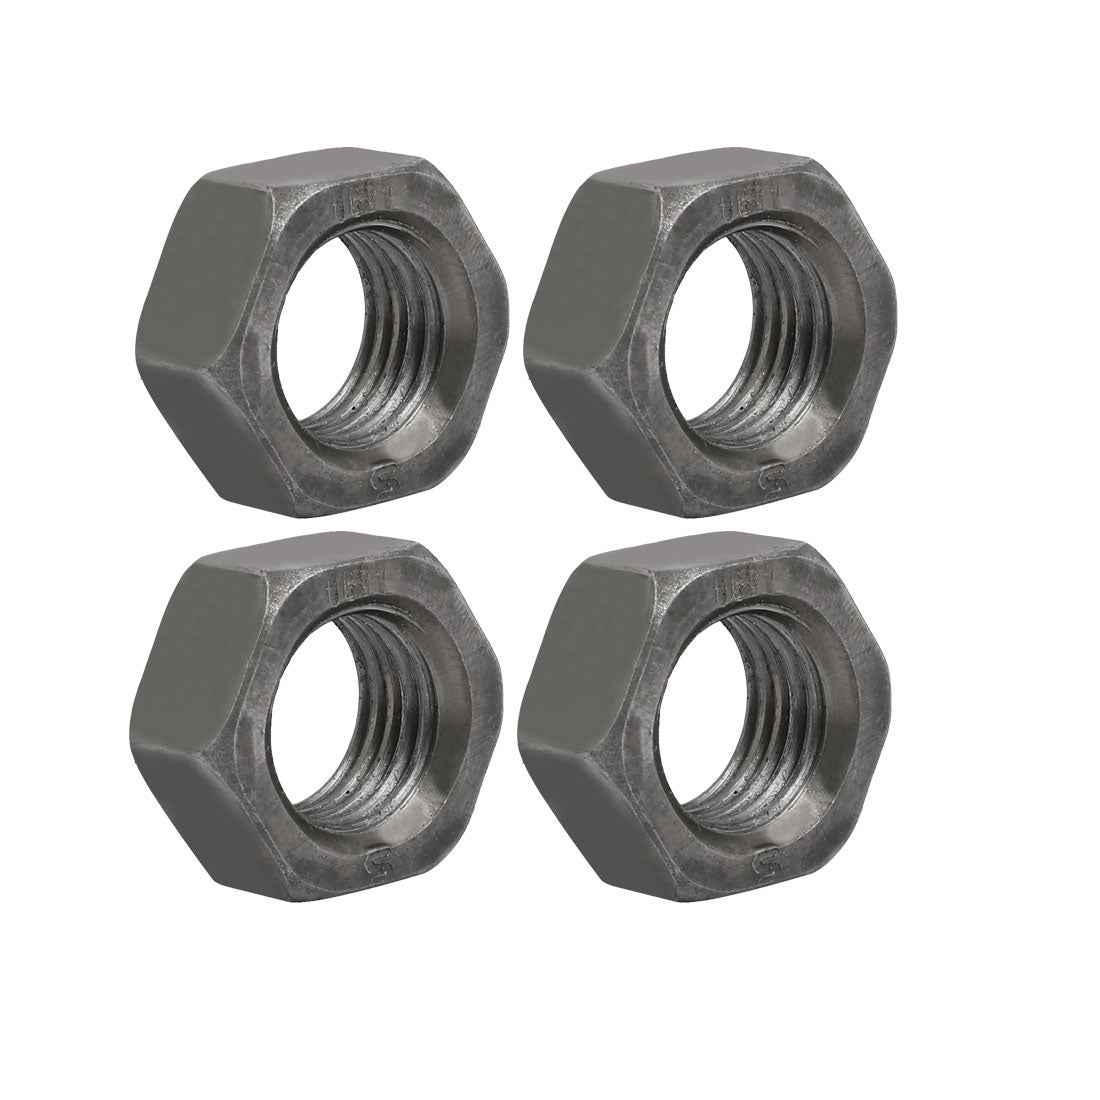 uxcell Uxcell 4pcs M22 Thread 2.5mm Pitch Metric Carbon Steel Left Hand Hex Nut